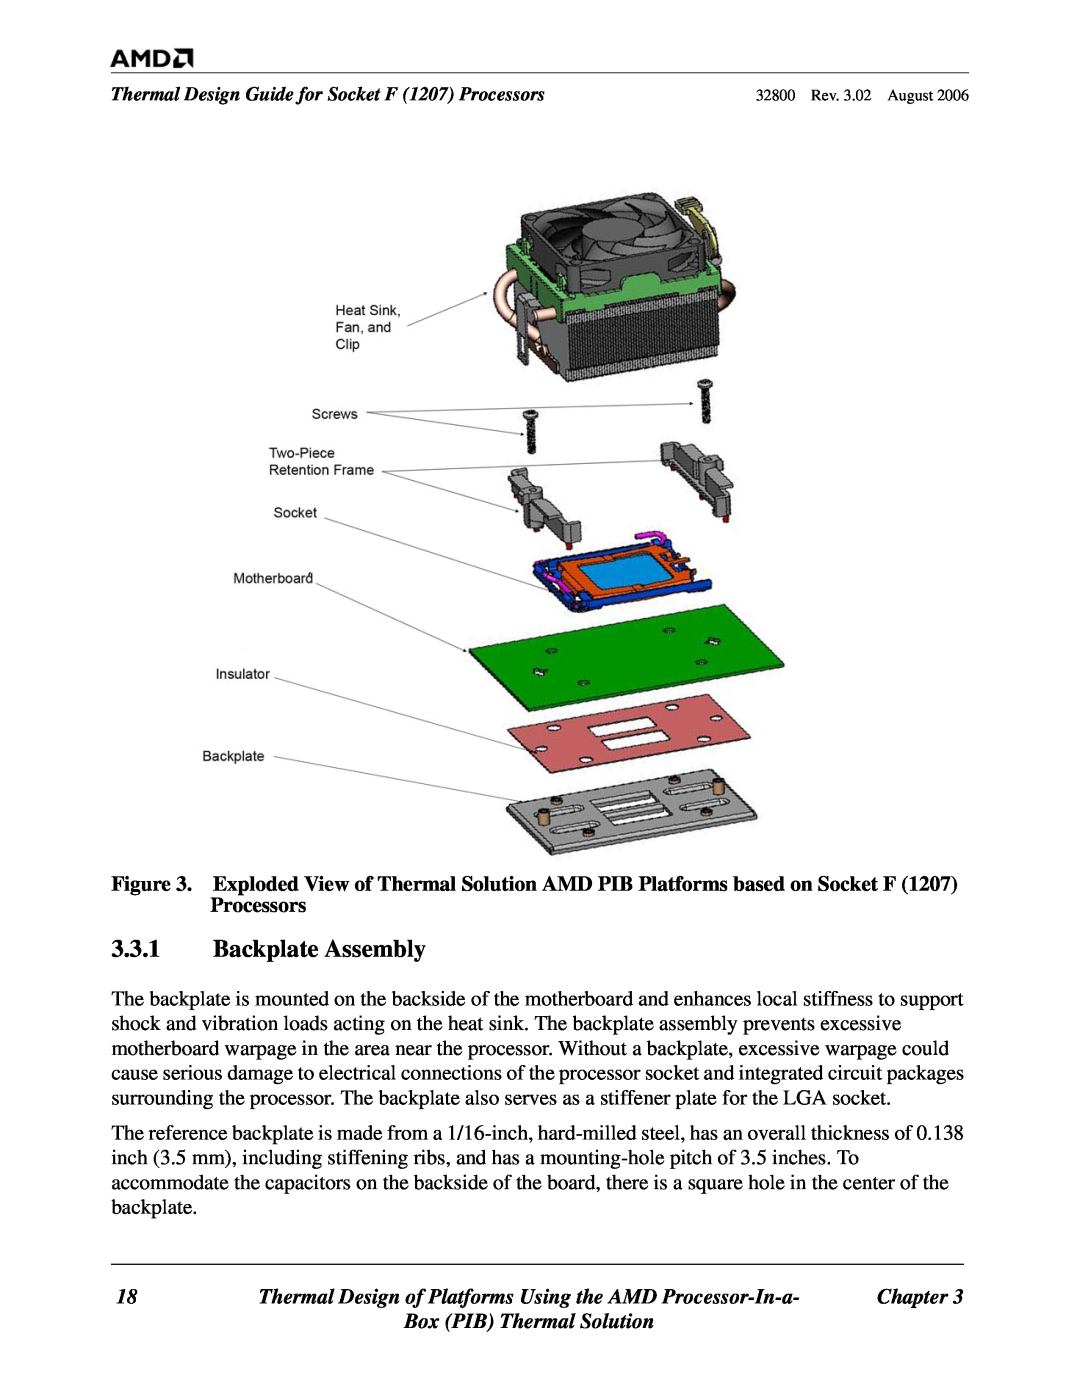 AMD 1207 manual Backplate Assembly, Thermal Design of Platforms Using the AMD Processor-In-a 